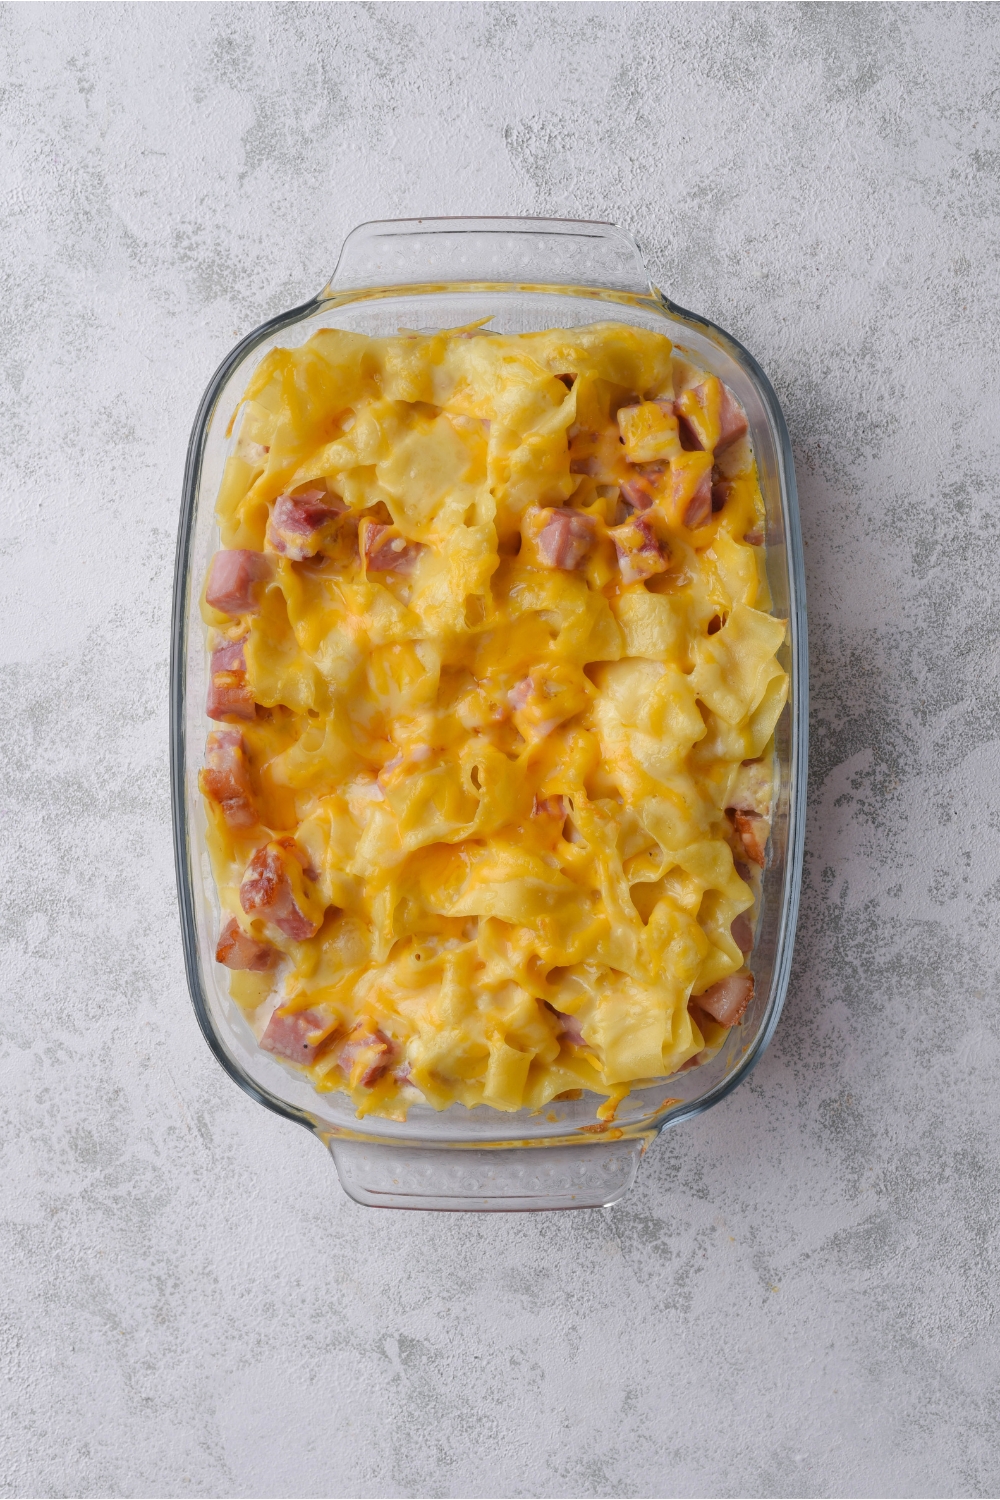 A baking dish filled with ham and noodle casserole covered in a layer of melted cheese.